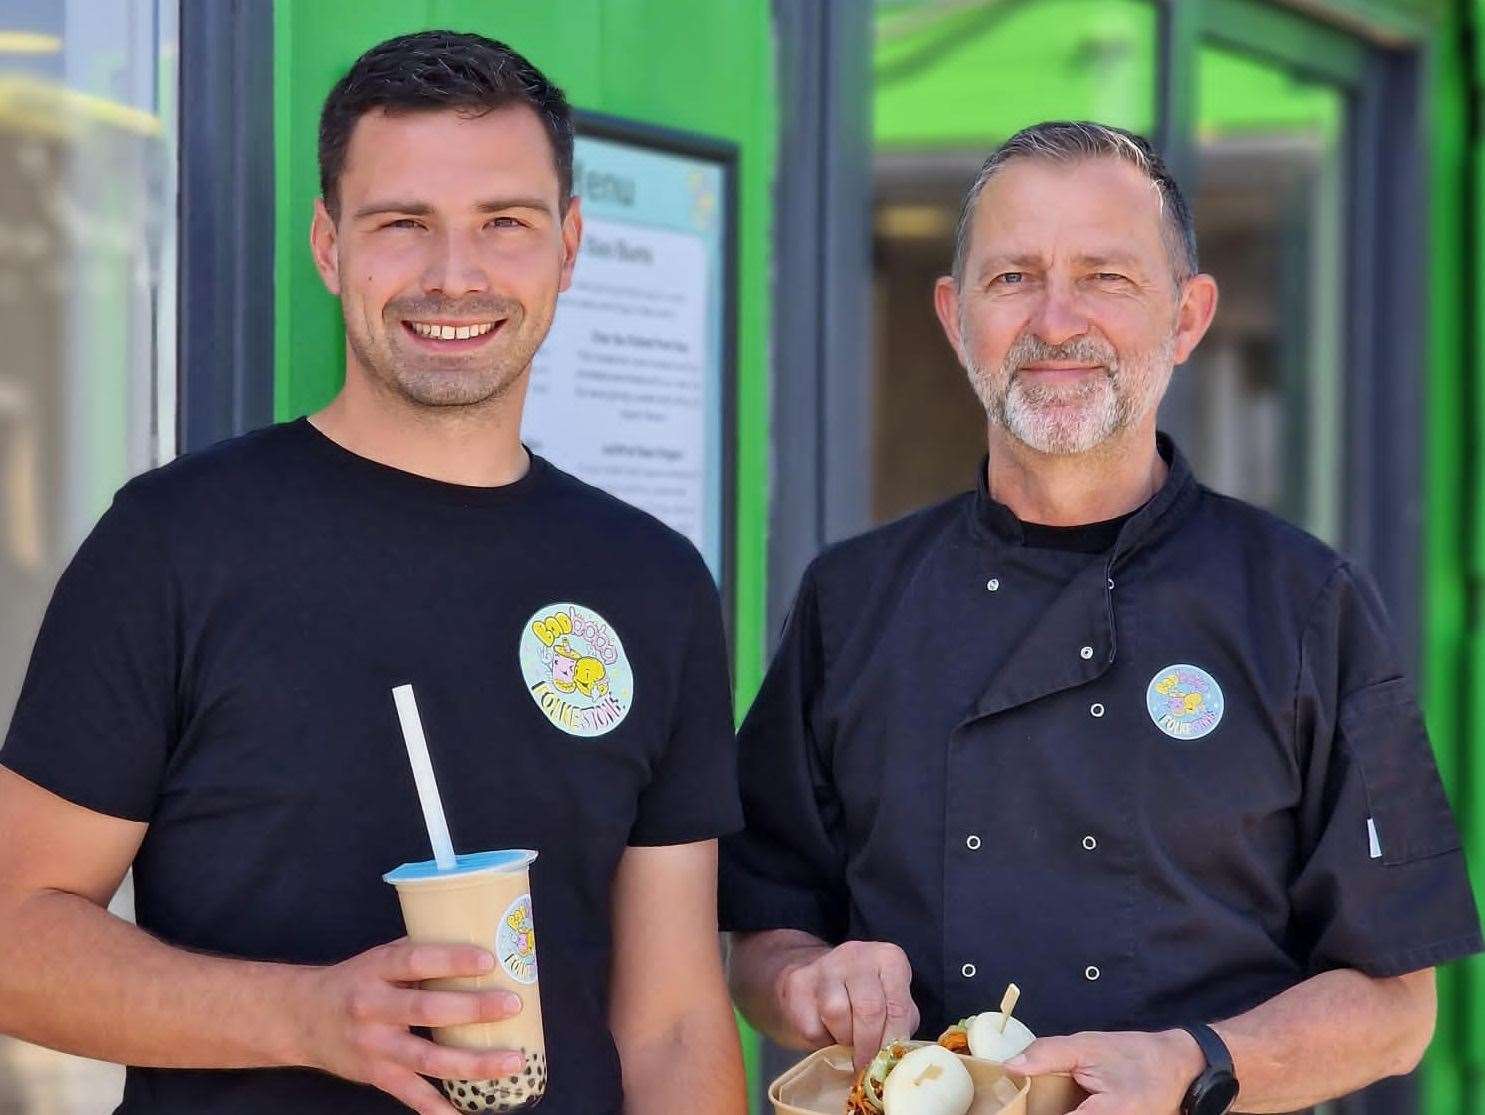 The owners of Baoboba, Jack Sherrin (left) and Andrew Young